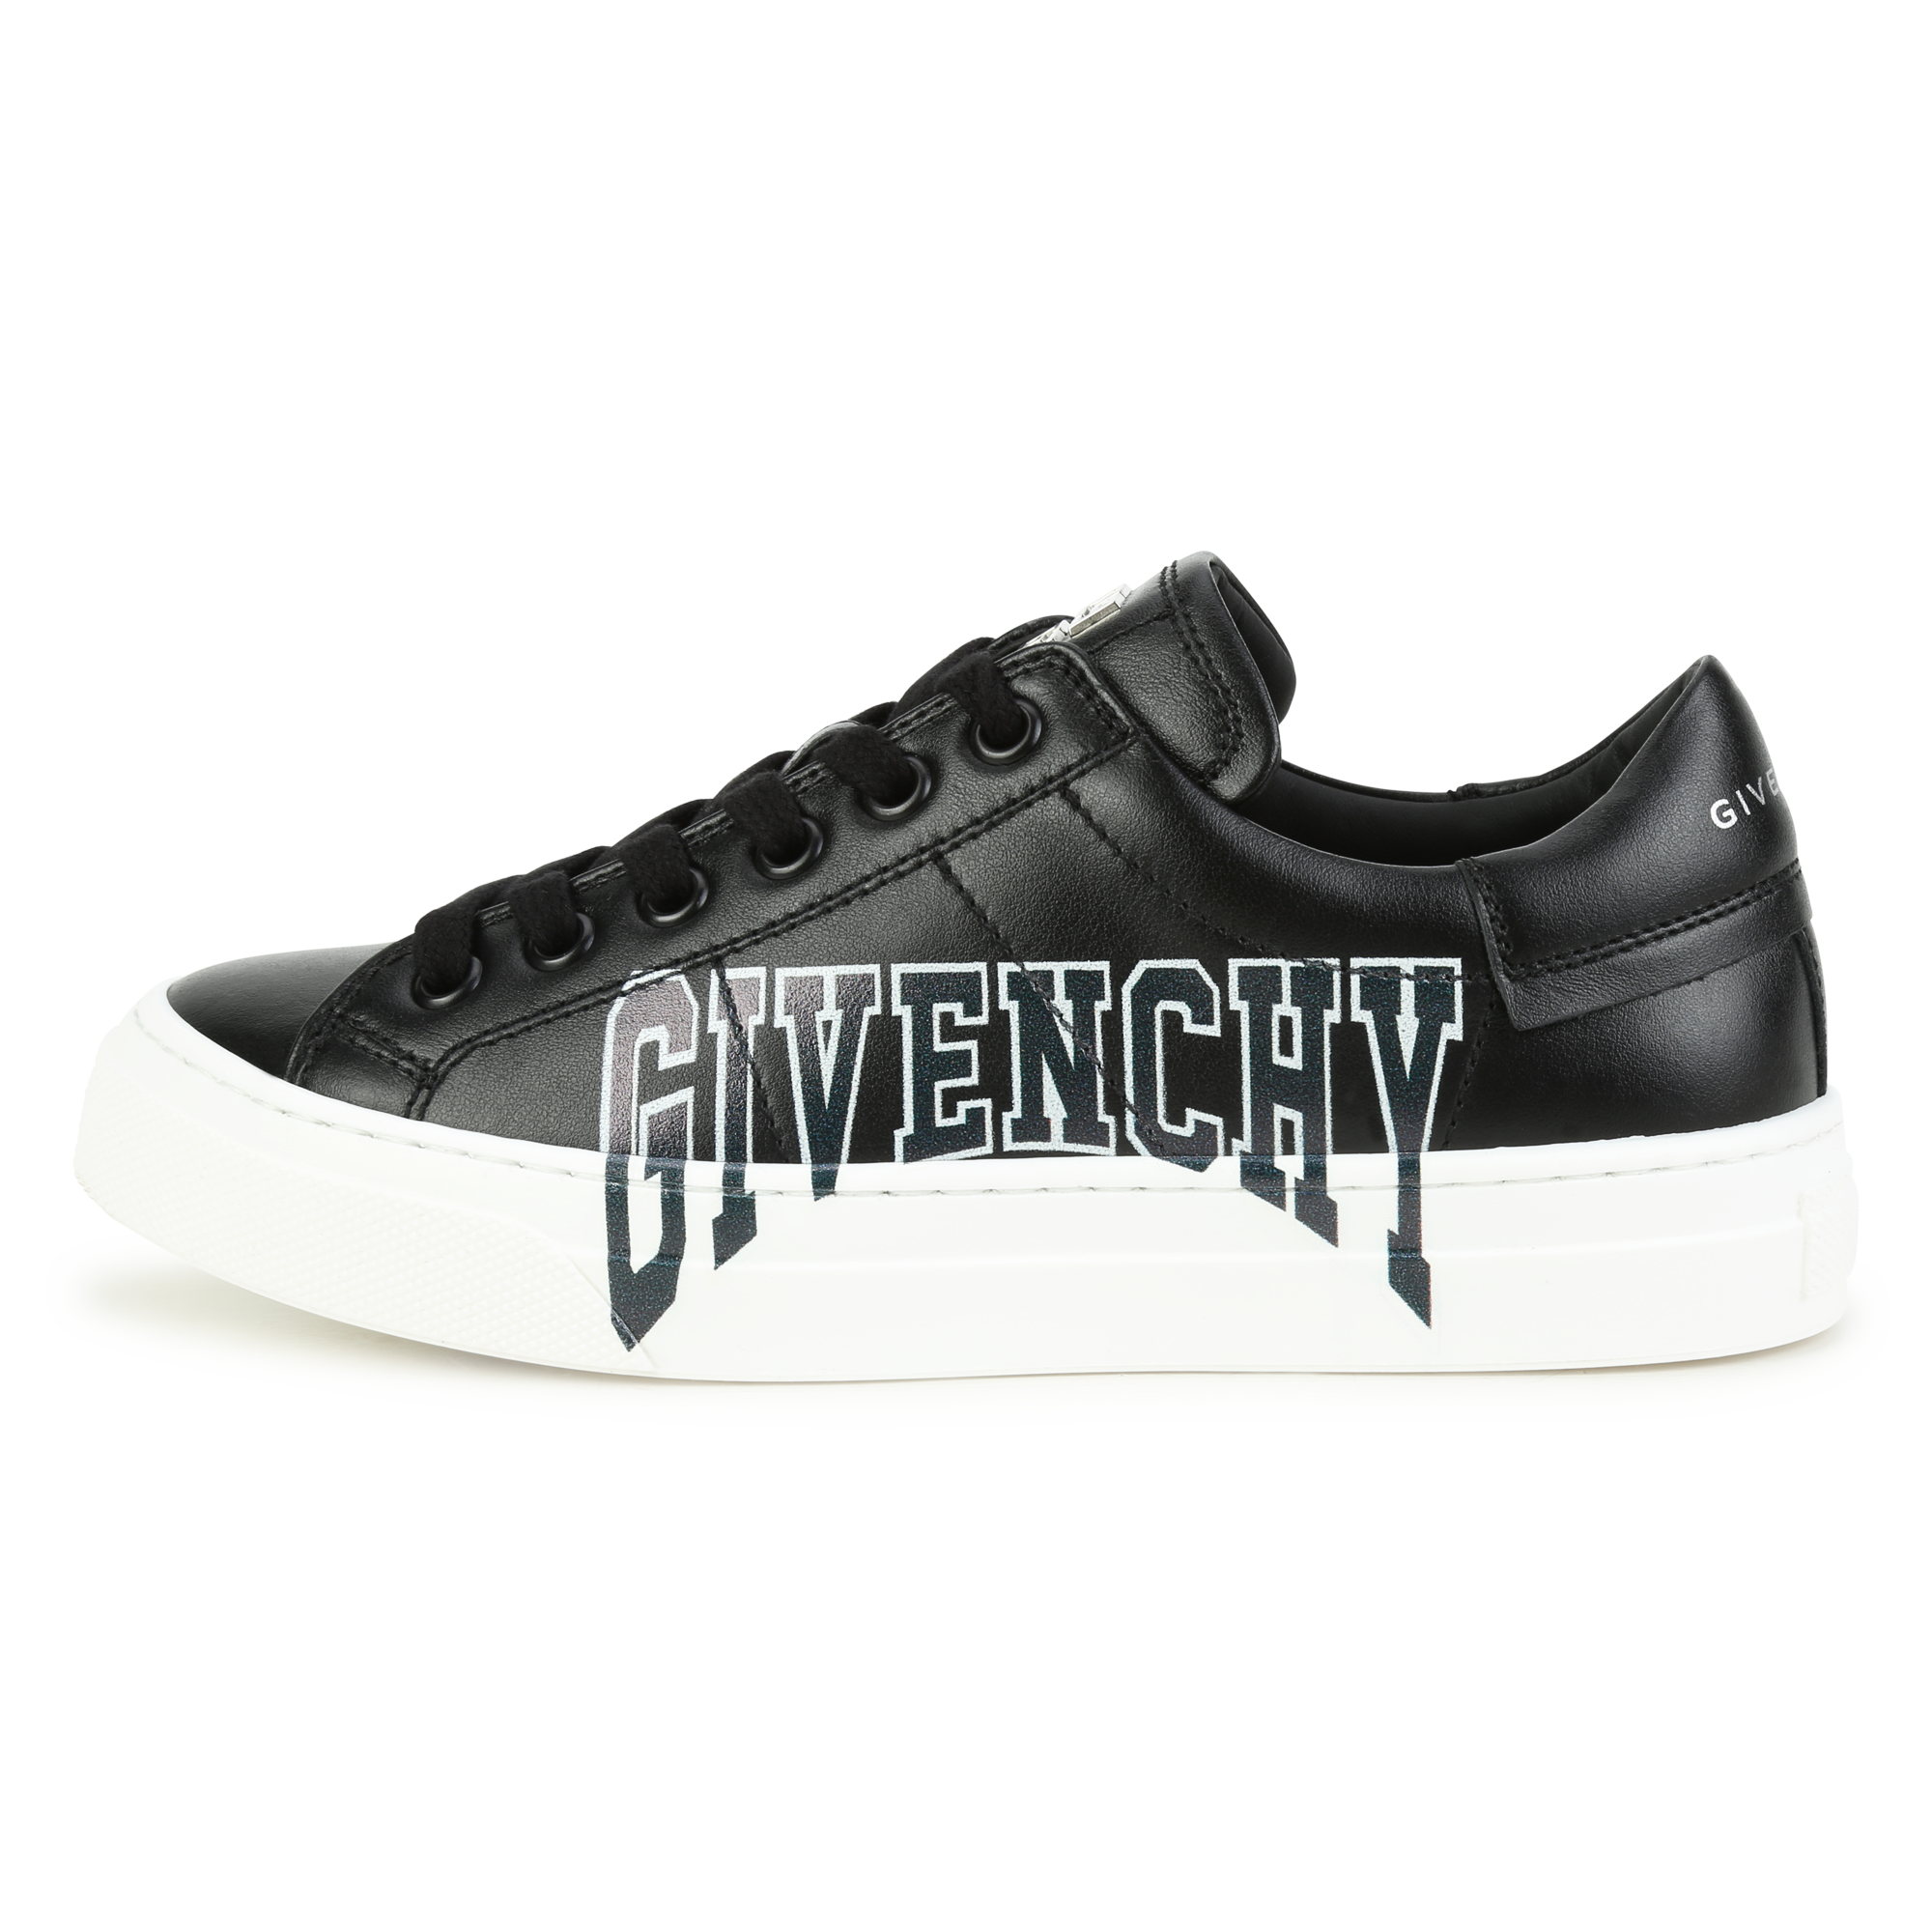 Givenchy Men's G4 Patent Leather Low-Top Sneakers - Bergdorf Goodman